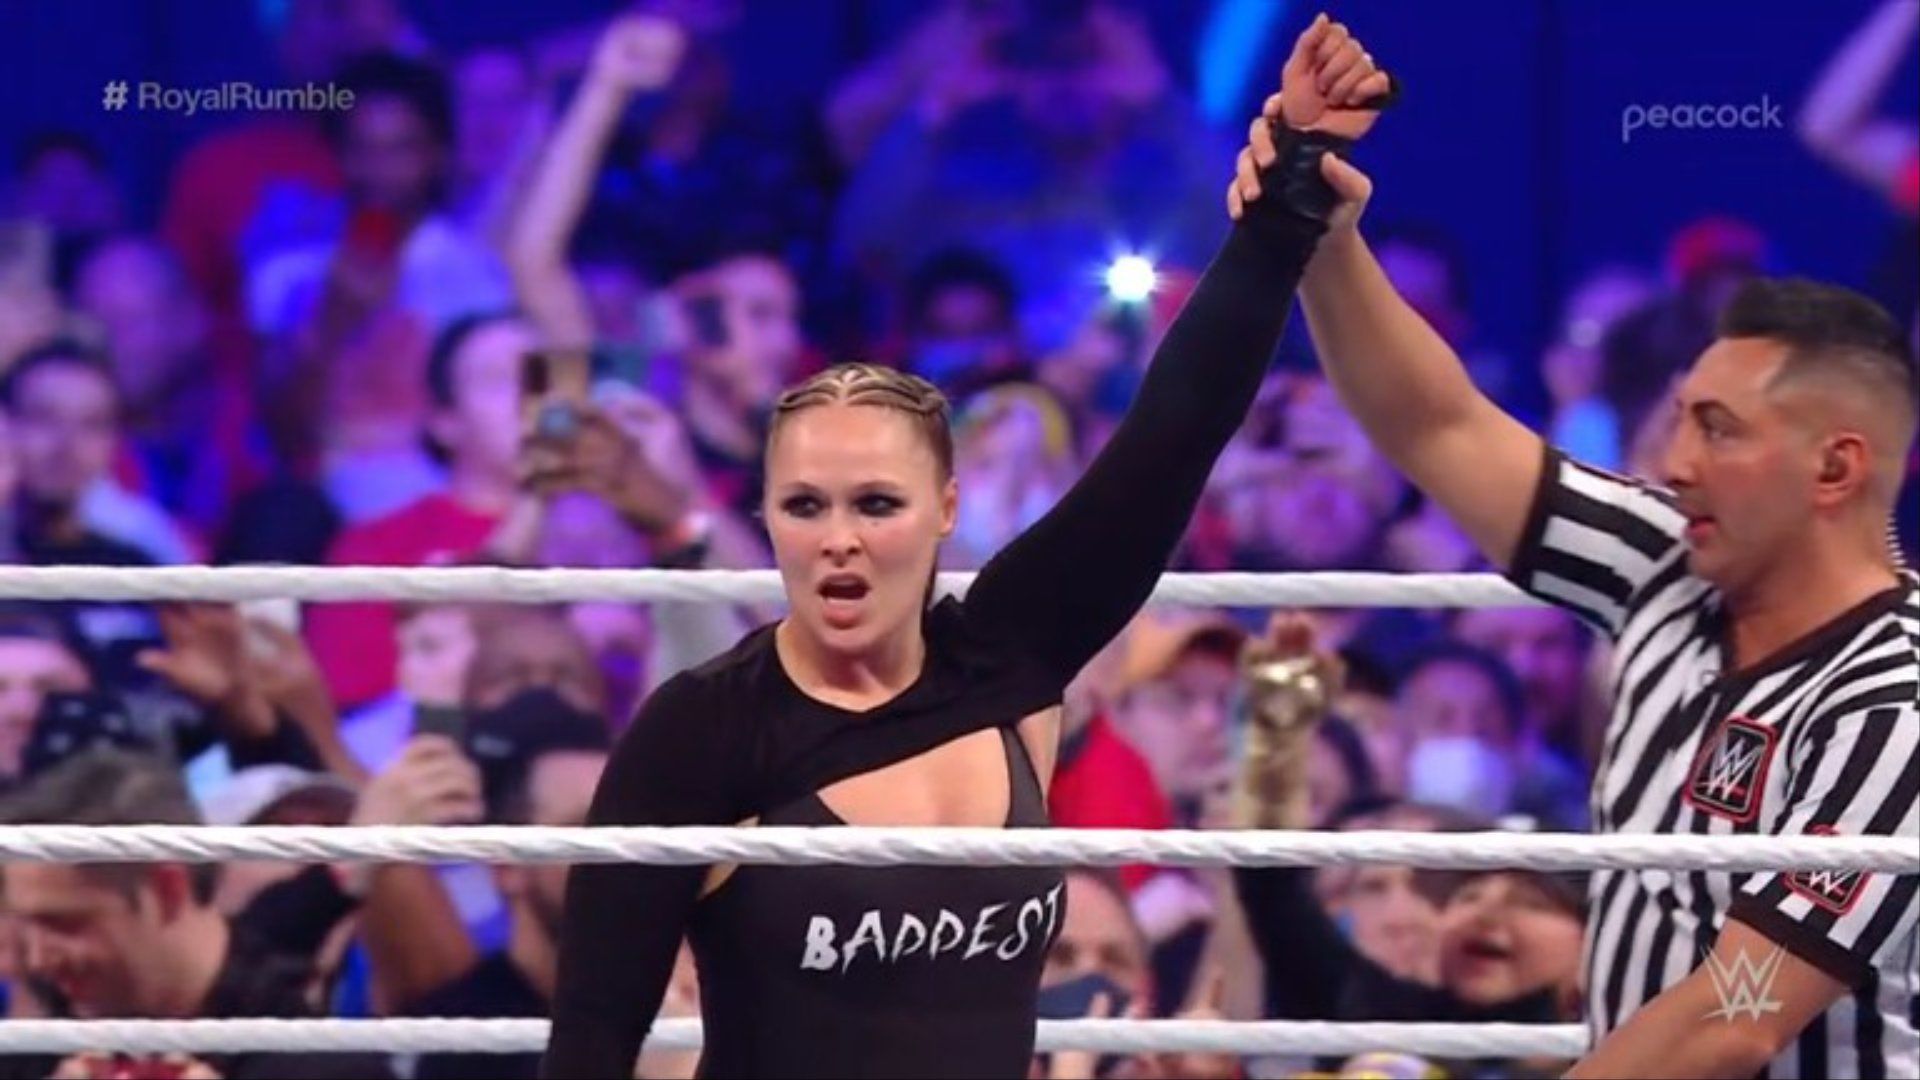 Ronda Rousey expected to return to WWE as a heel